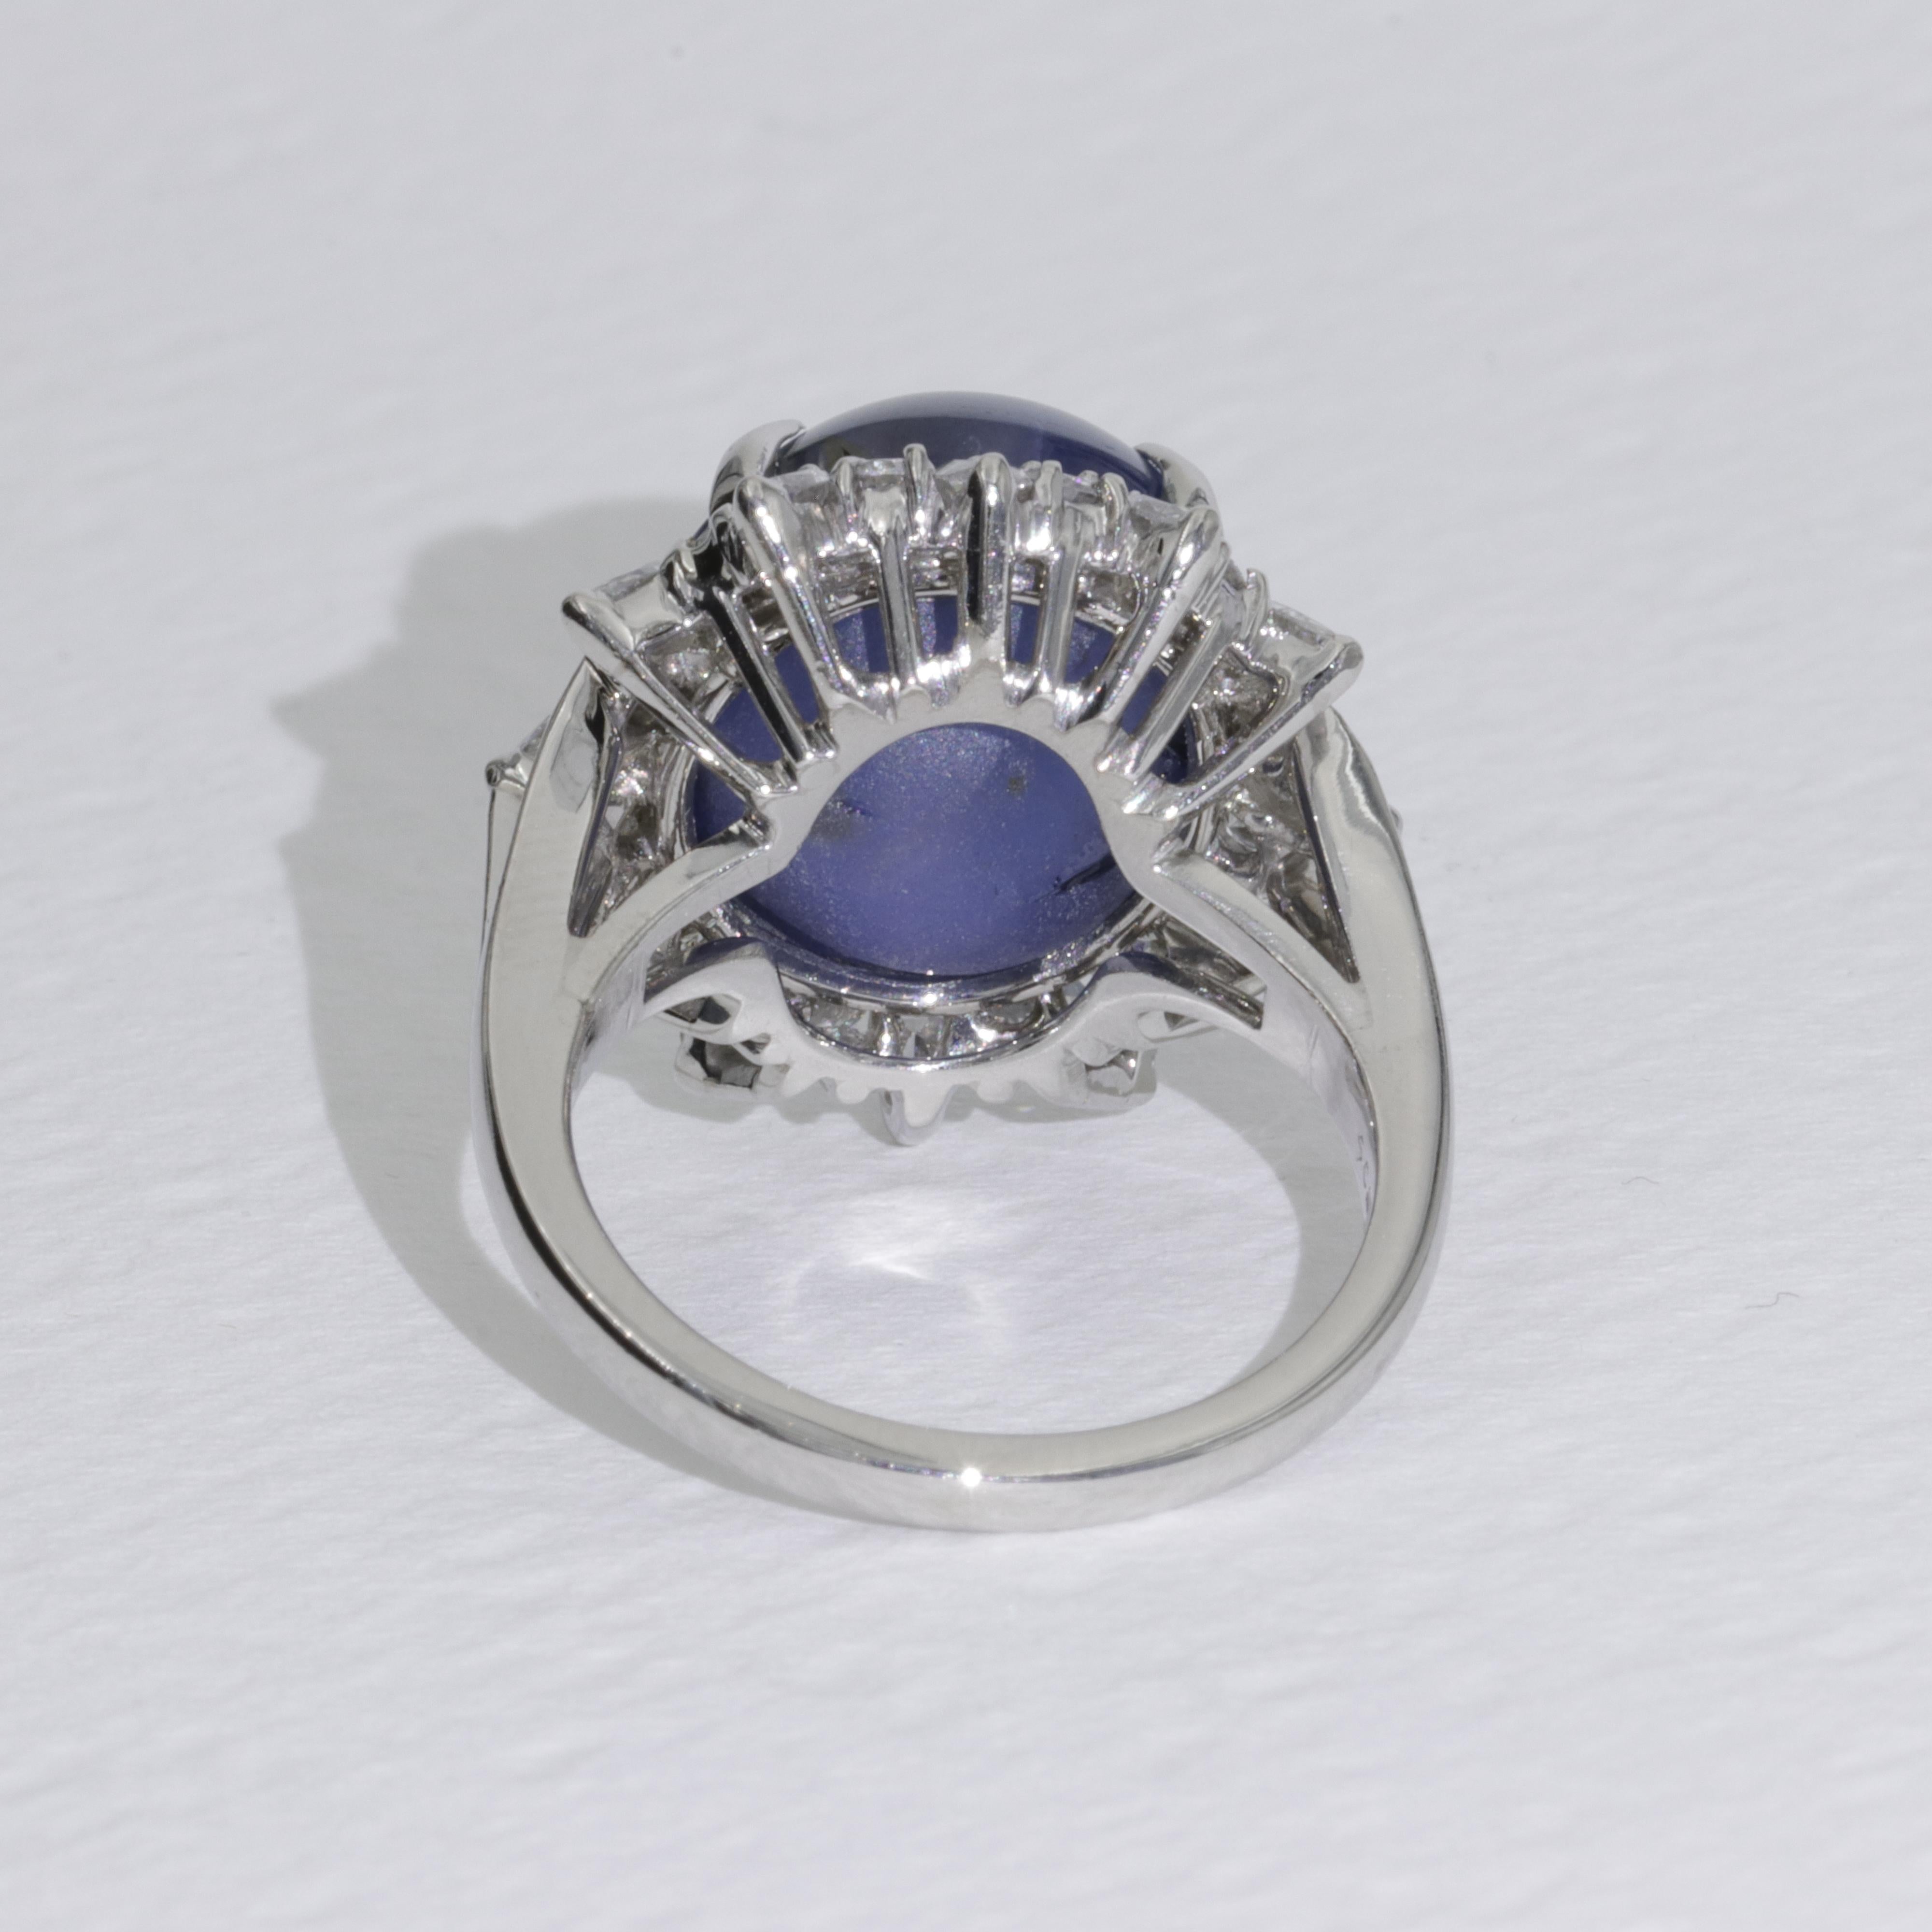 Cabochon 21.74ct Burma No Heat Star Sapphire in Platinum Ring by Shreve, Crump and Low  For Sale